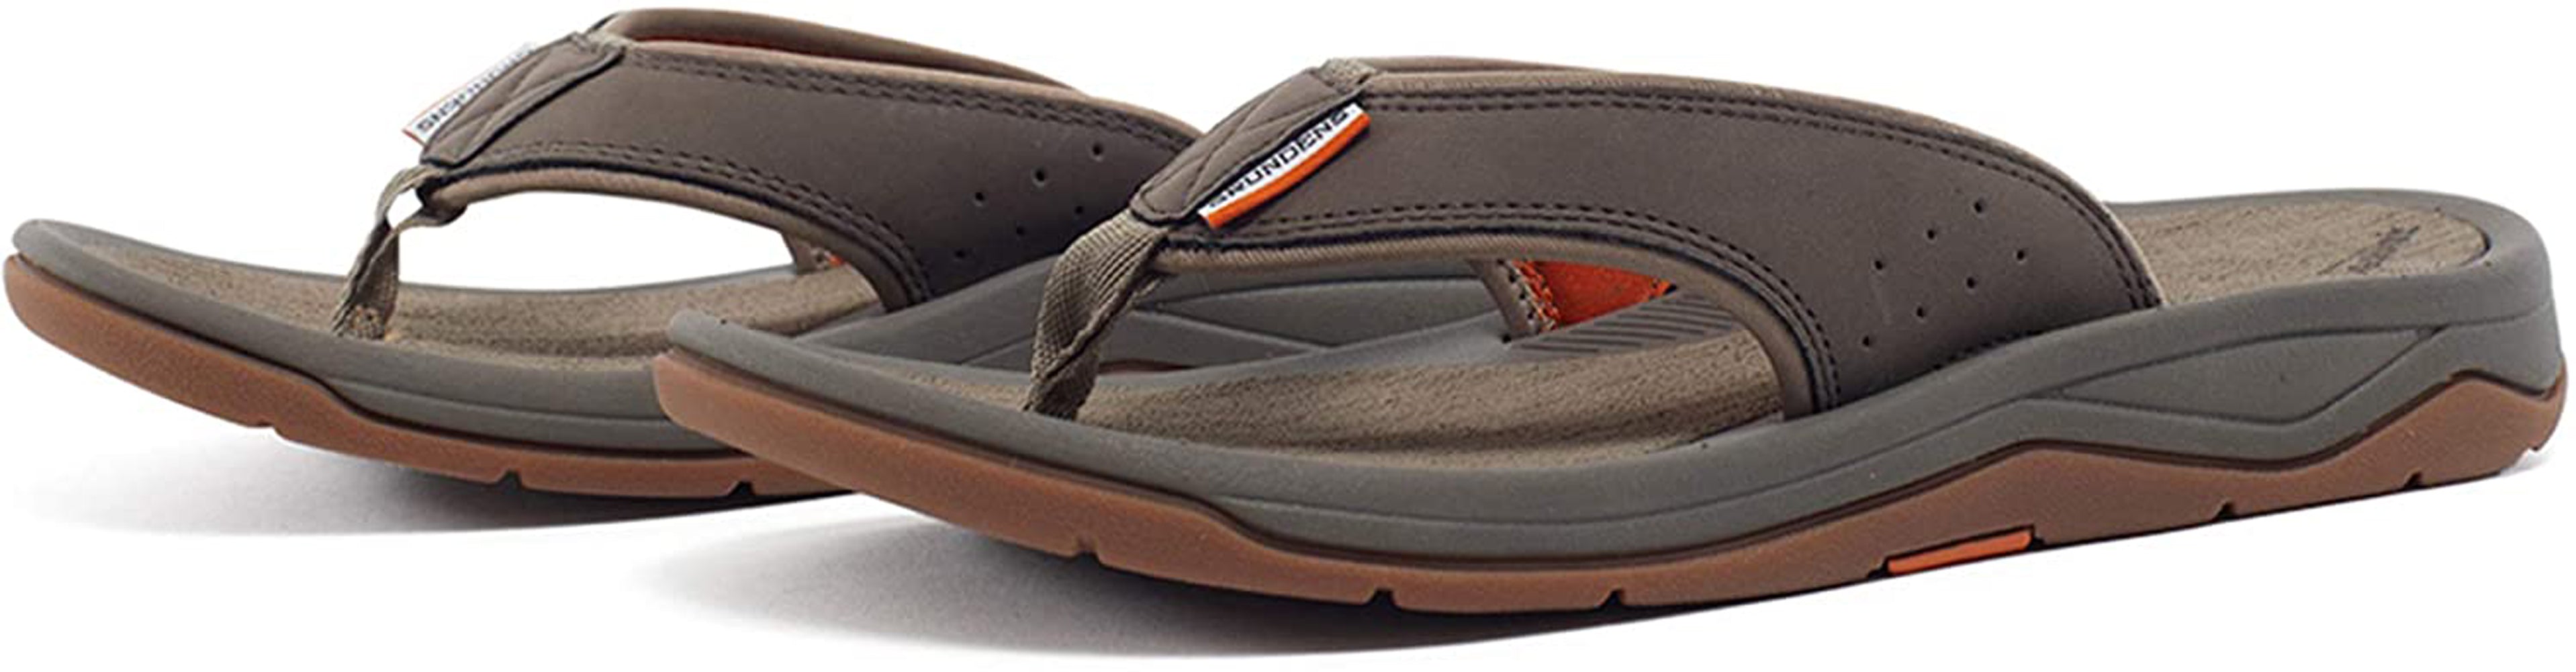 Deck-Boss Sandal in Brindle color from the side view